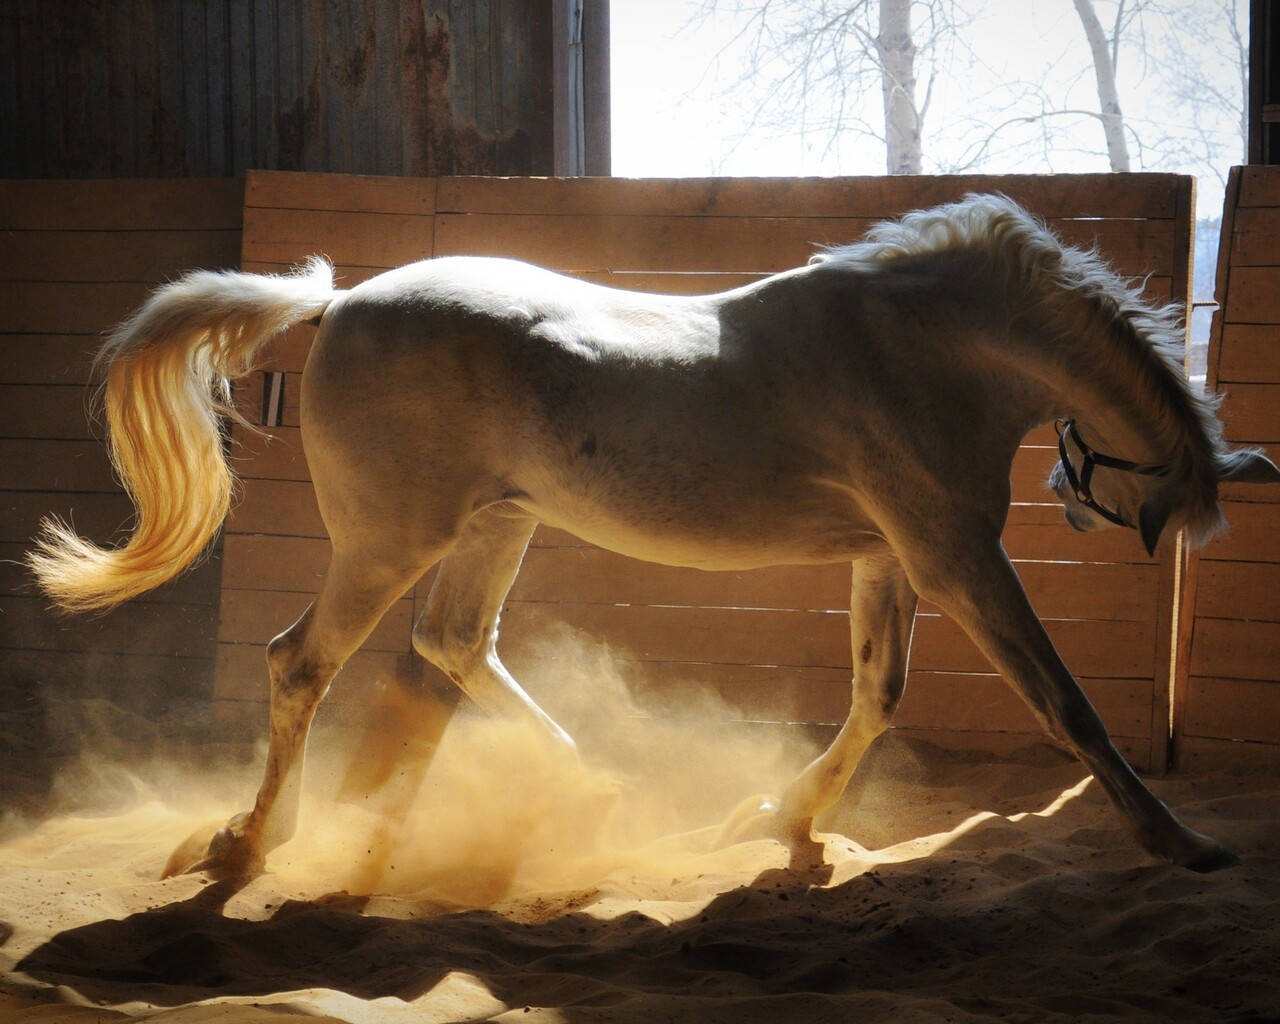 Dusty White Horse In Stable Wallpaper